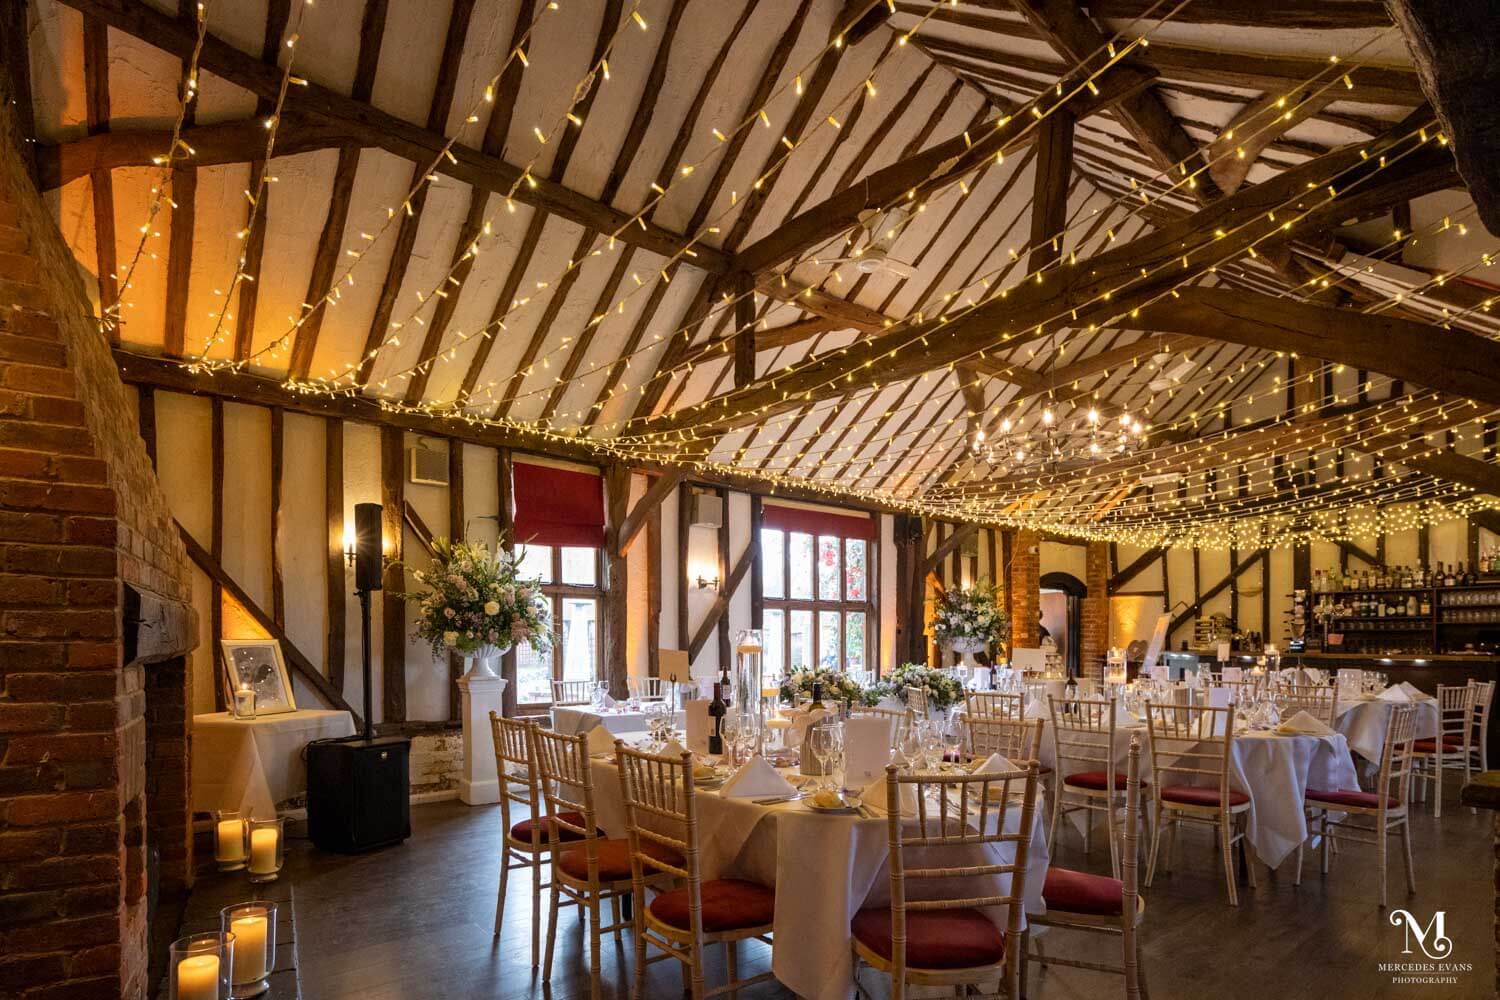 Briar Barn at Cantley House hotel ready for the wedding breakfast